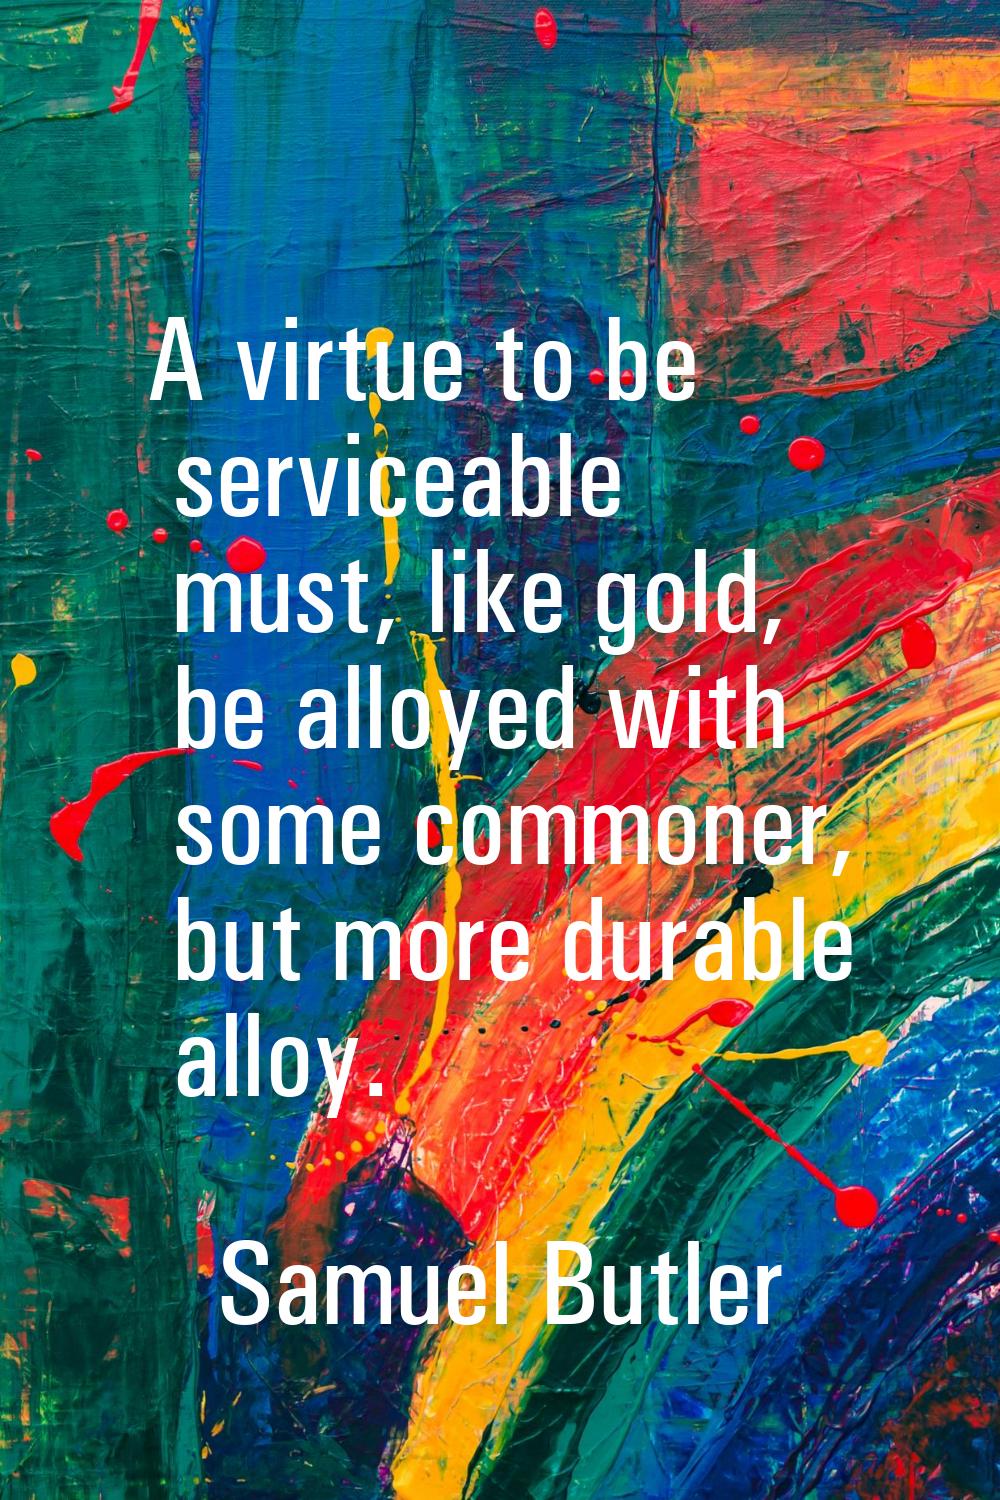 A virtue to be serviceable must, like gold, be alloyed with some commoner, but more durable alloy.